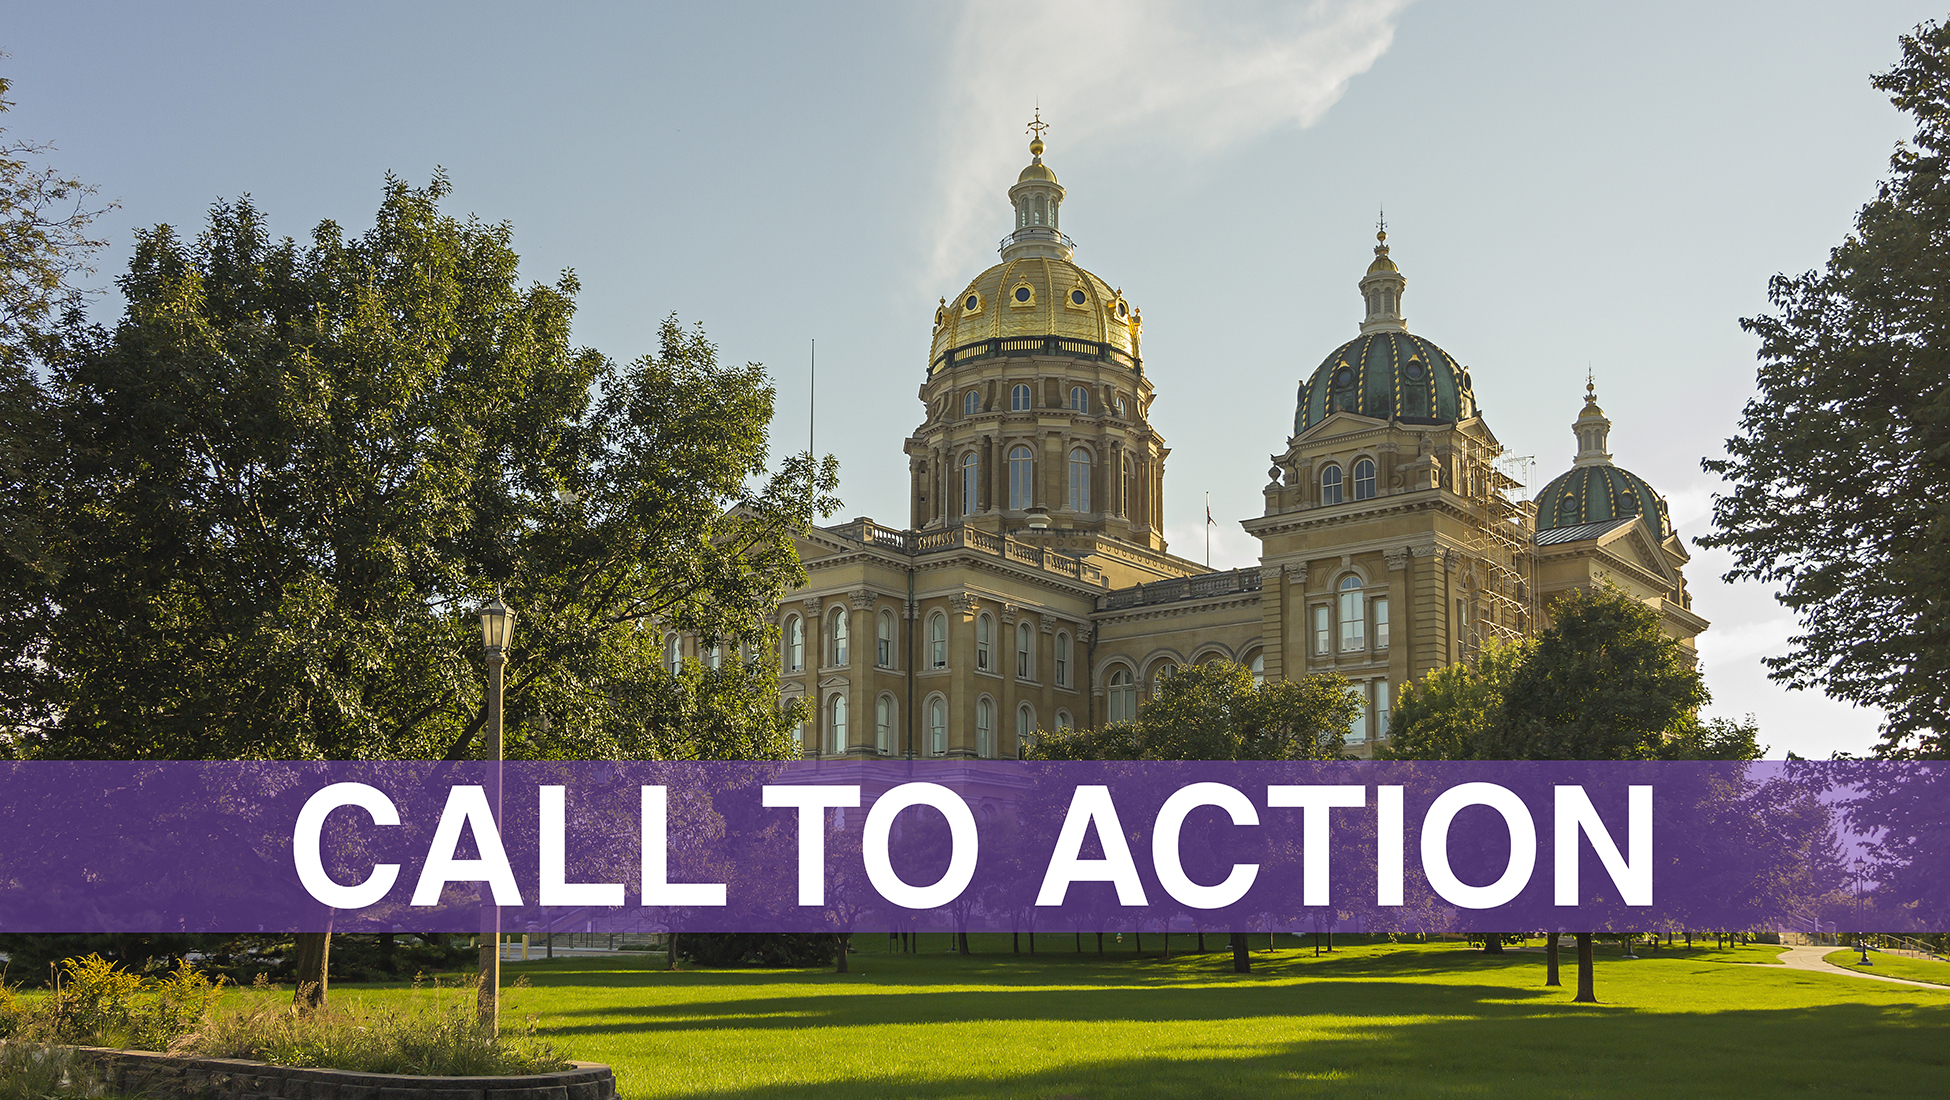 Call to Action - 01.31.2022